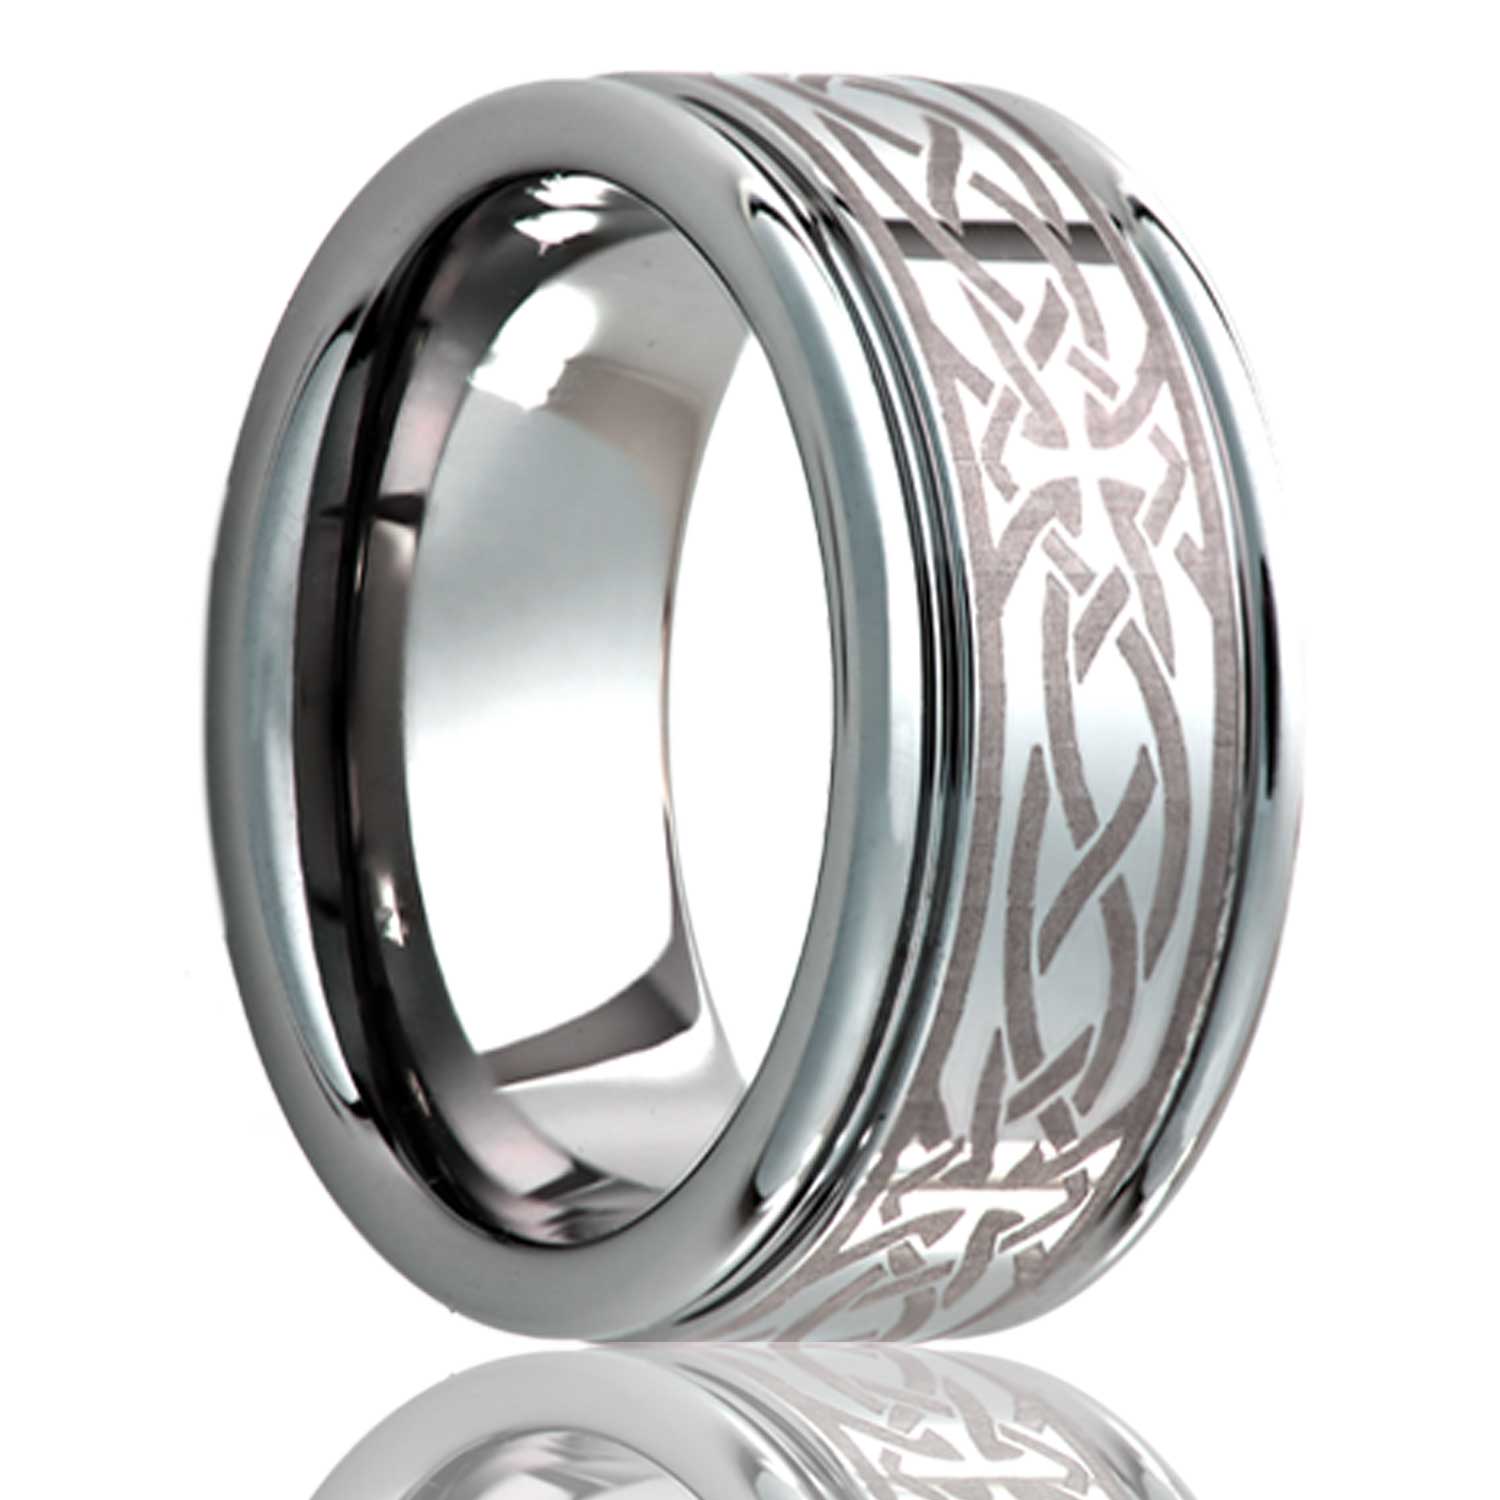 A celtic cross knot grooved titanium wedding band displayed on a neutral white background.